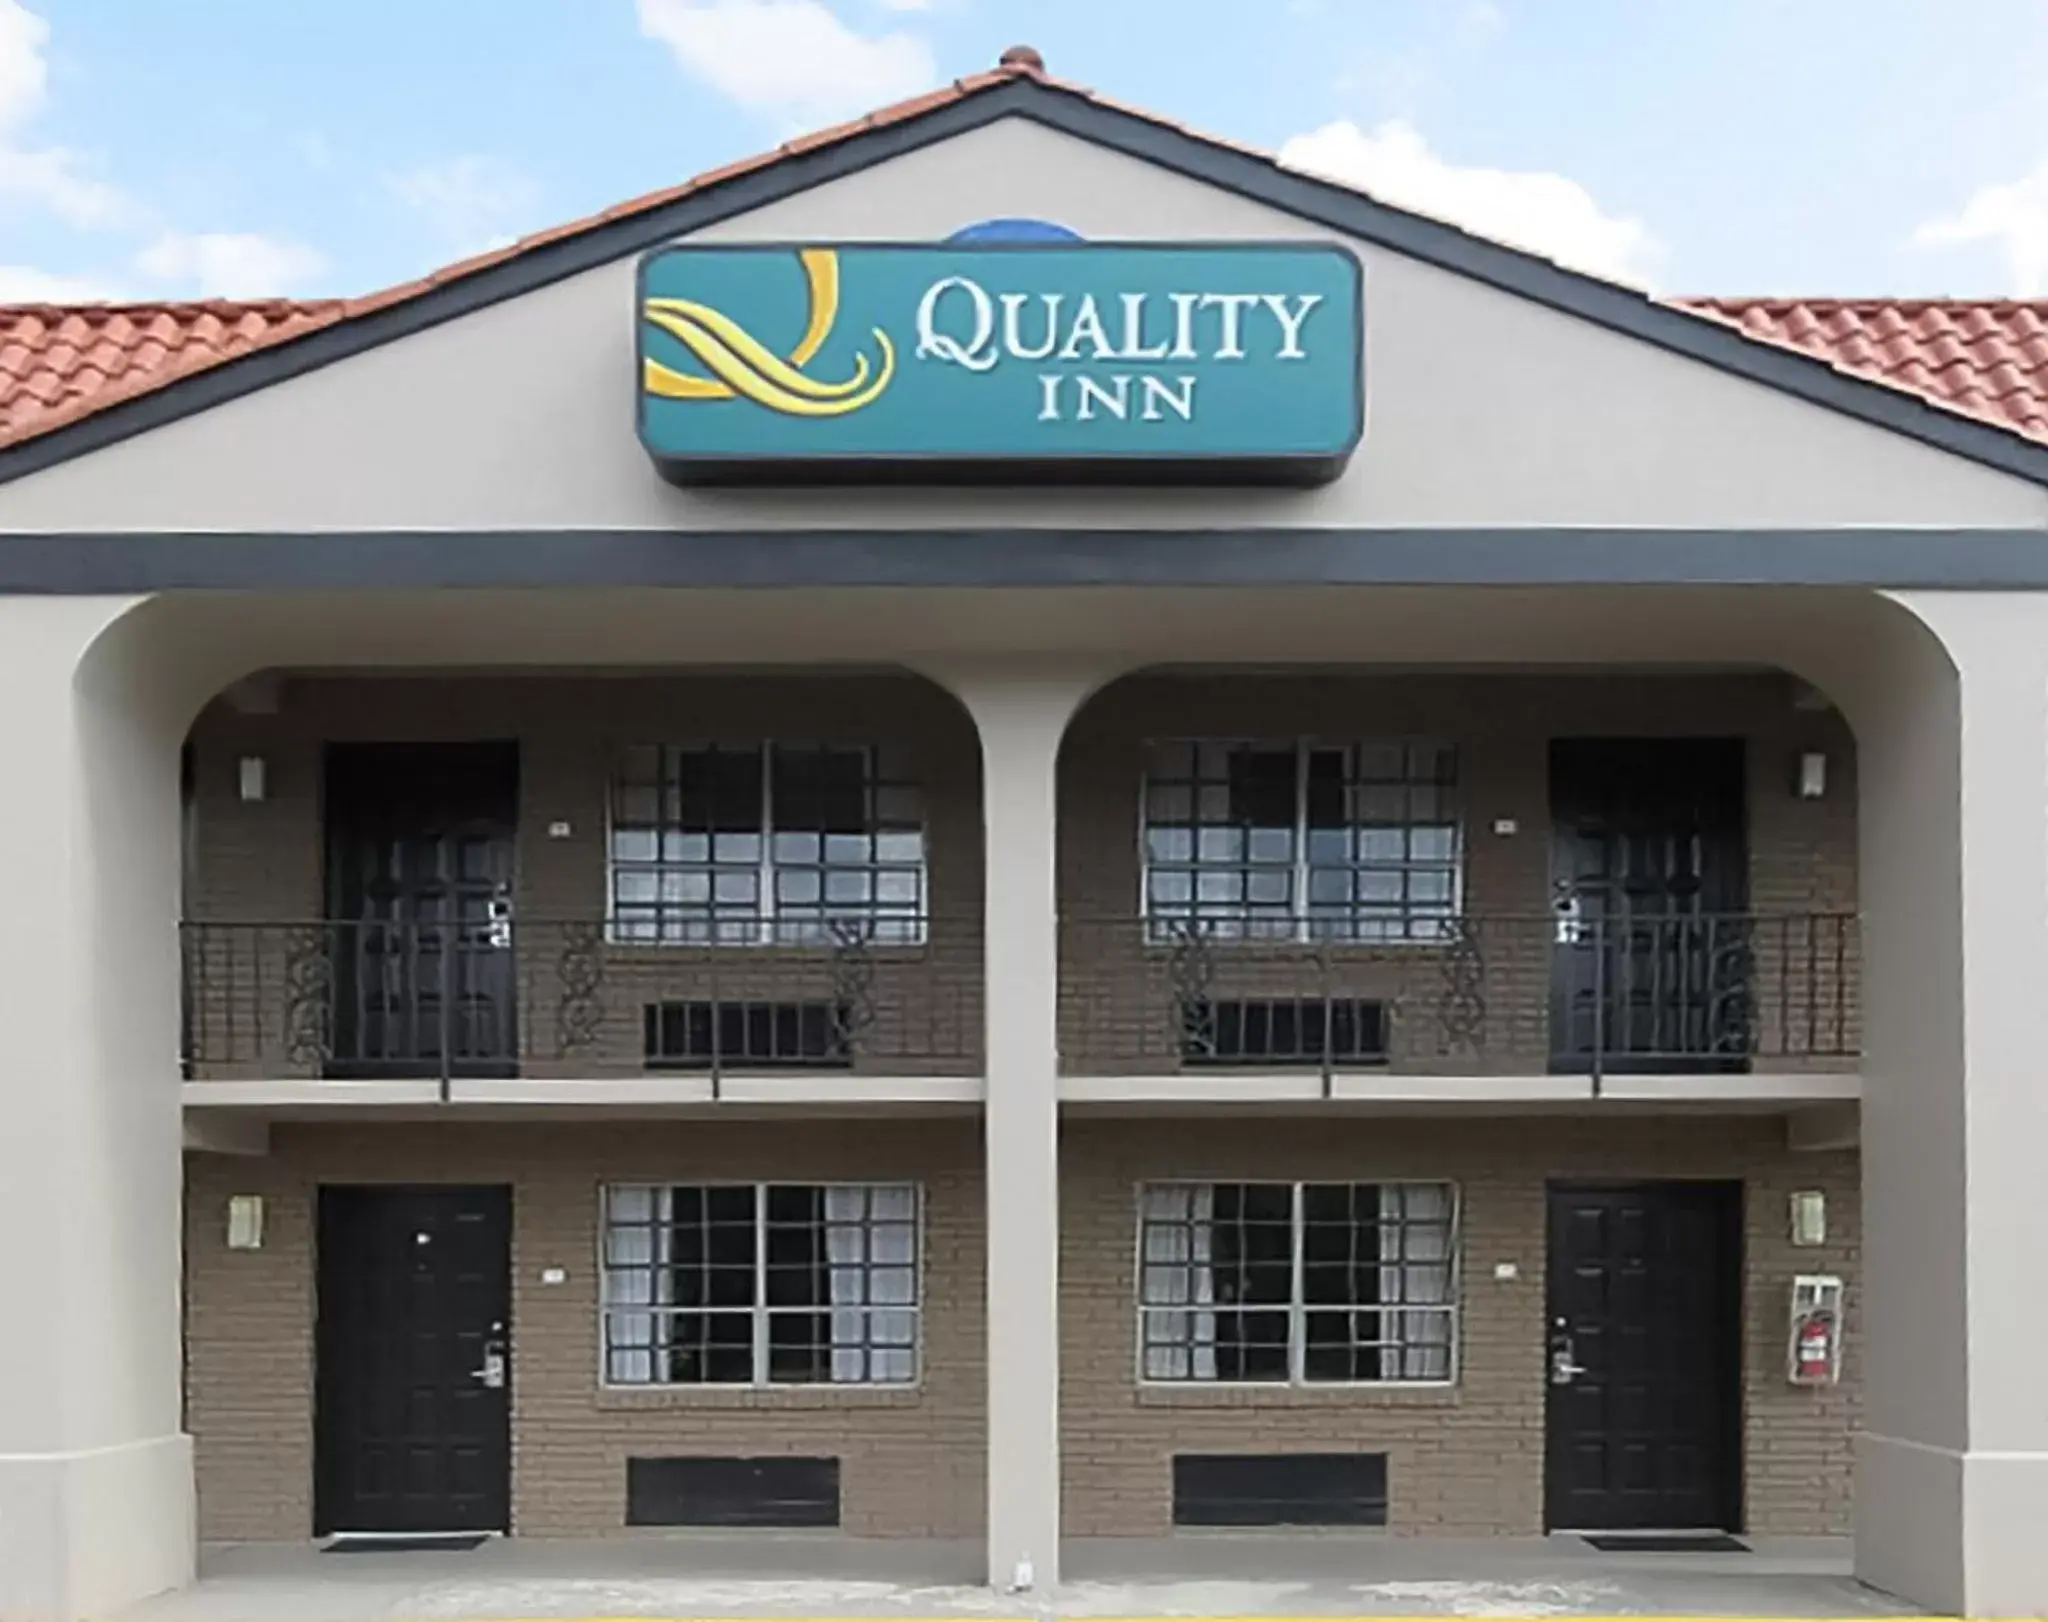 Property building in Quality Inn Forsyth